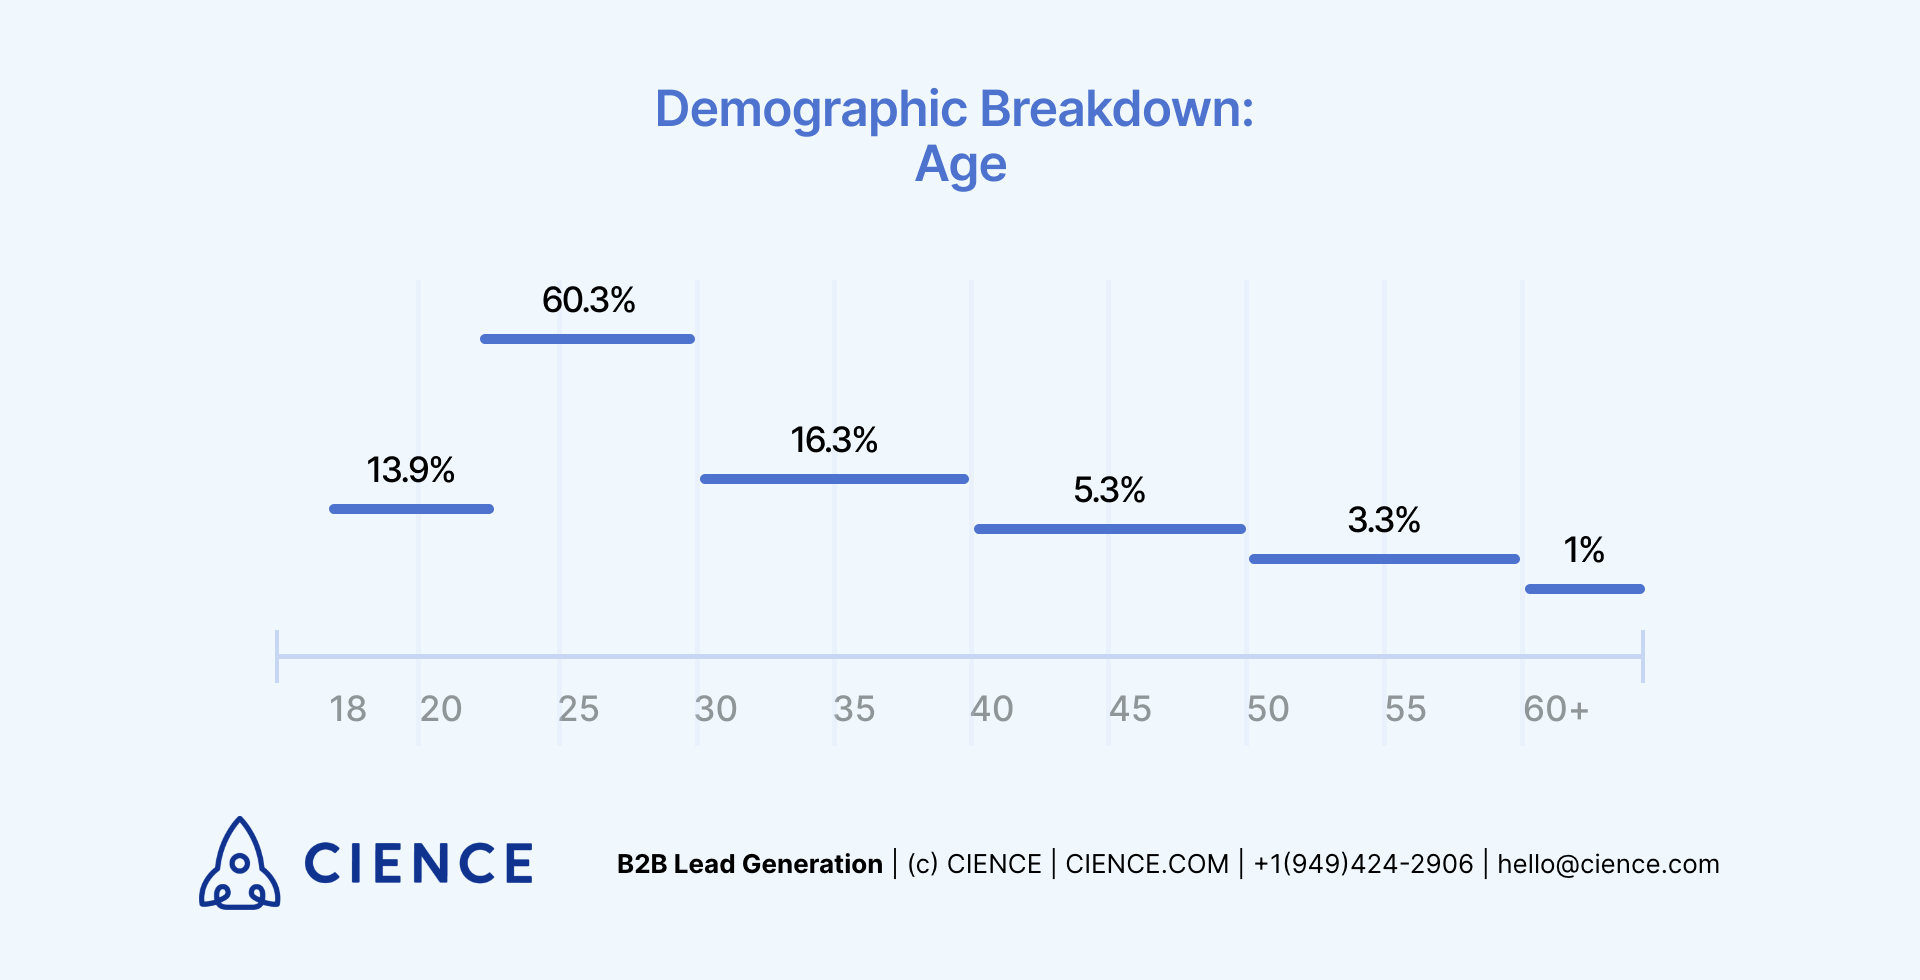 SDR Demographic Breakdown by Age